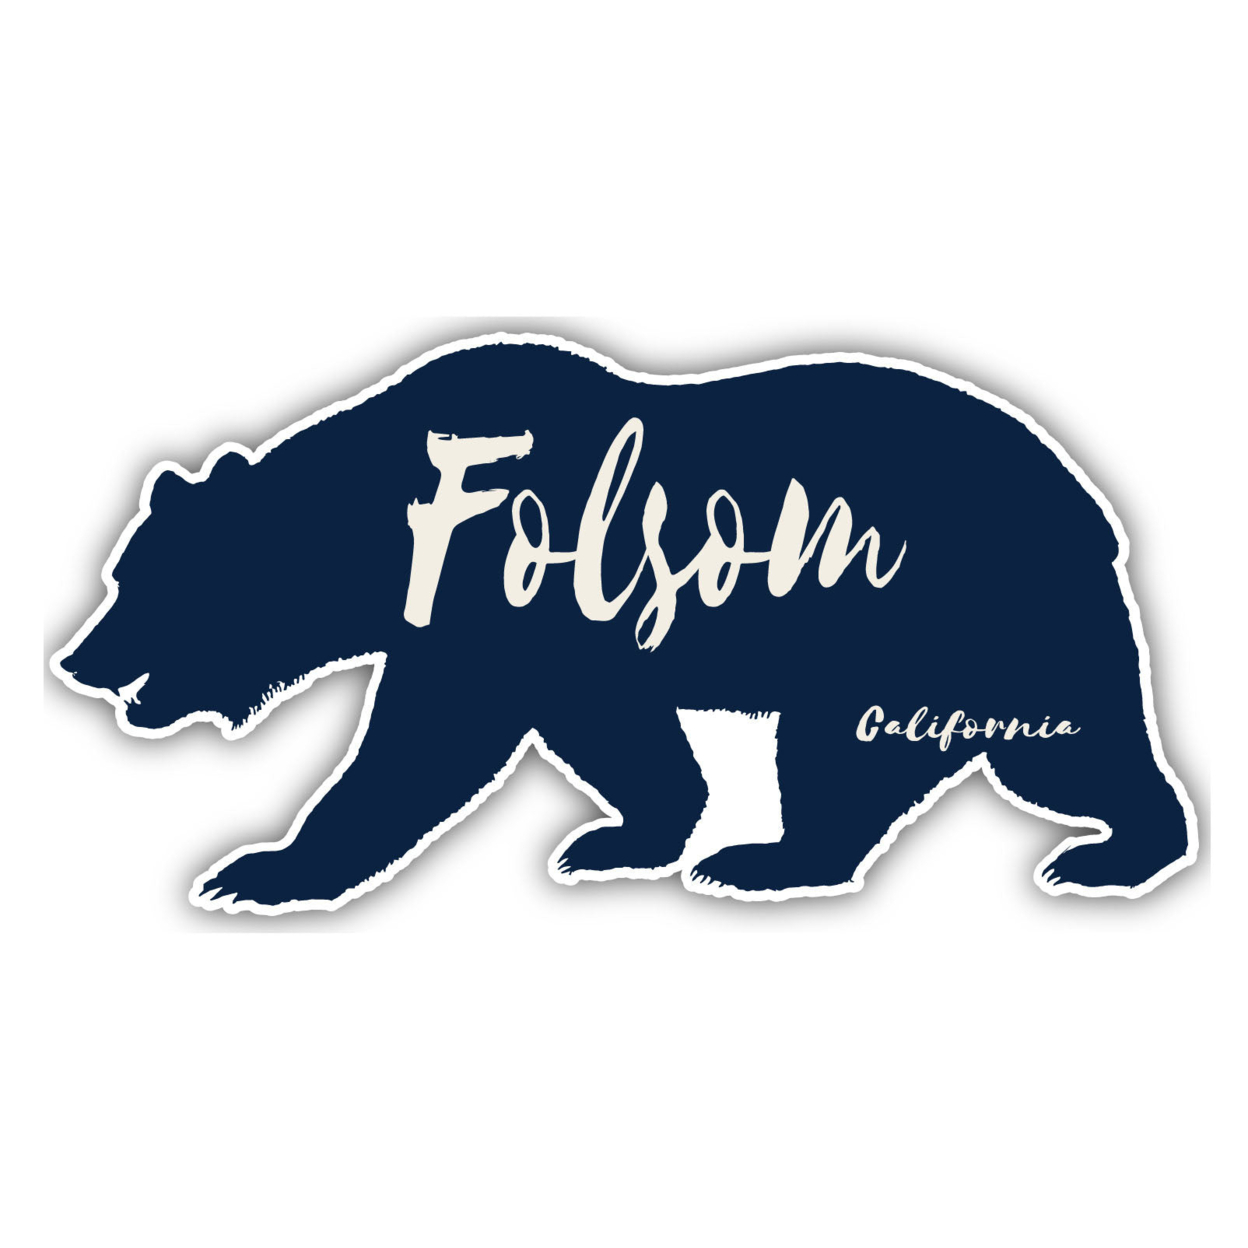 Folsom California Souvenir Decorative Stickers (Choose Theme And Size) - 4-Pack, 8-Inch, Bear